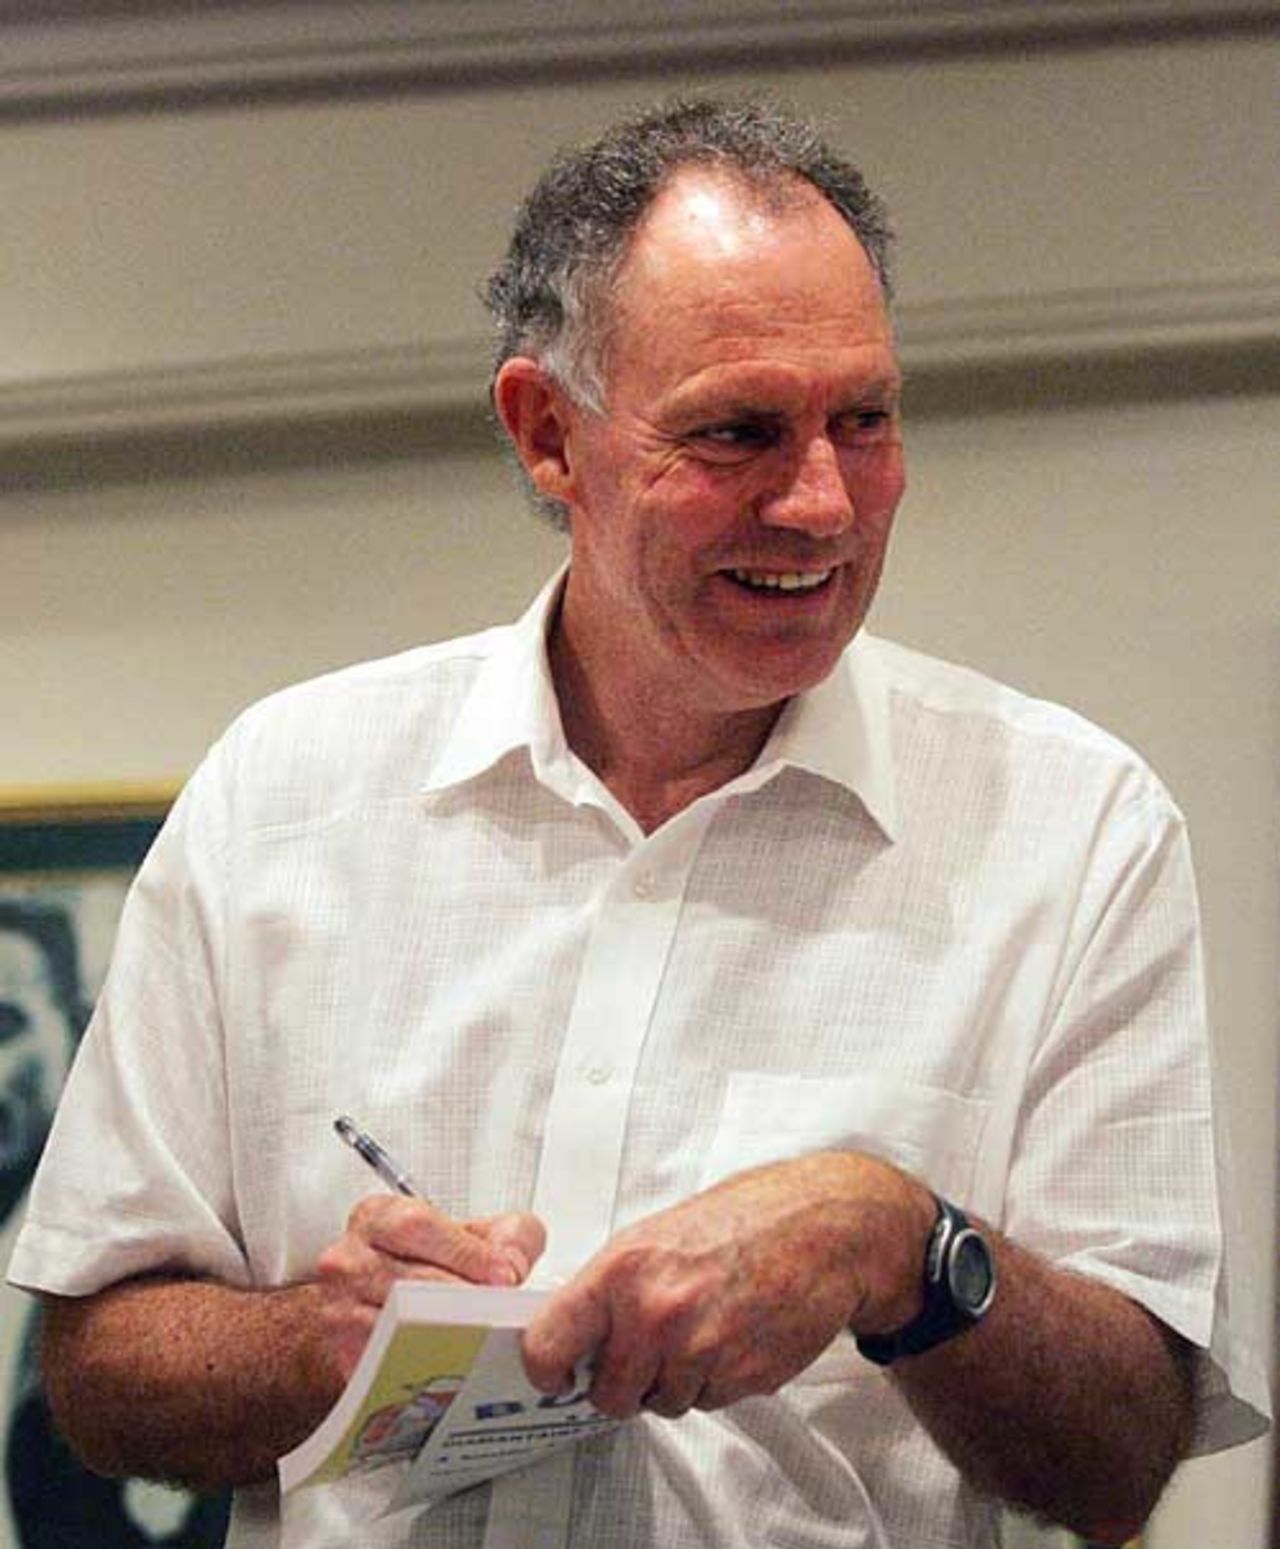 Greg Chappell signs copies of his new book, Cricket: The Making of Champions, Mumbai, October 6, 2006